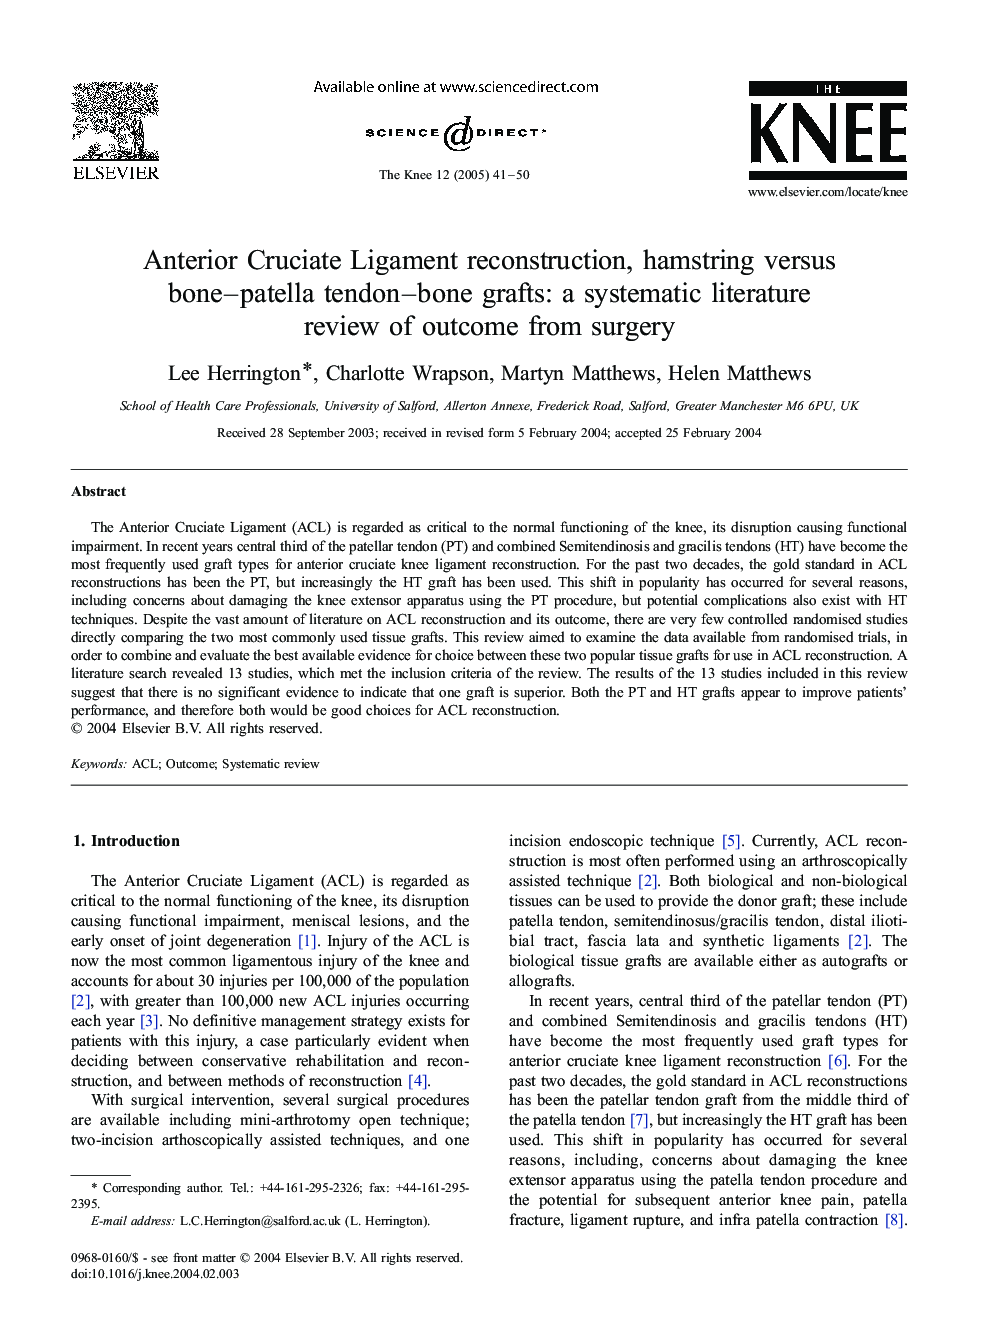 Anterior Cruciate Ligament reconstruction, hamstring versus bone-patella tendon-bone grafts: a systematic literature review of outcome from surgery